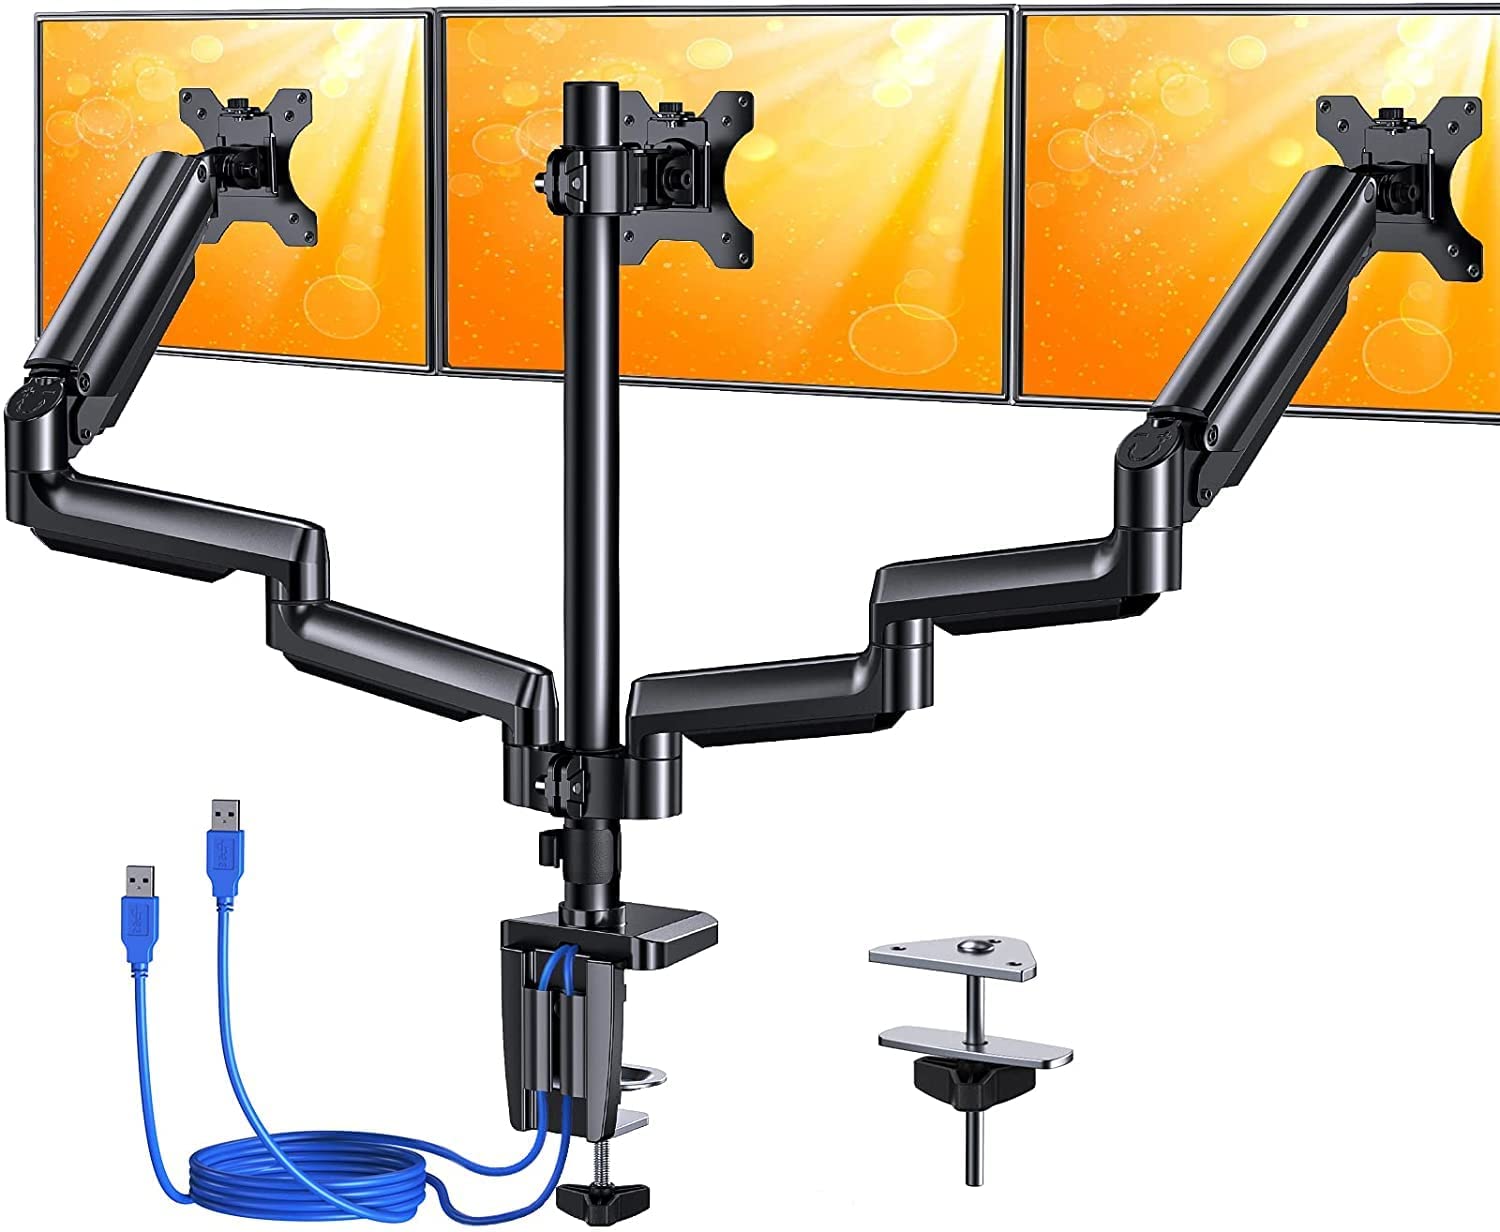 ErGear Dual-Gas Spring Arm Triple Monitor Stand Mount (Up to 27") - $63 (Amazon)